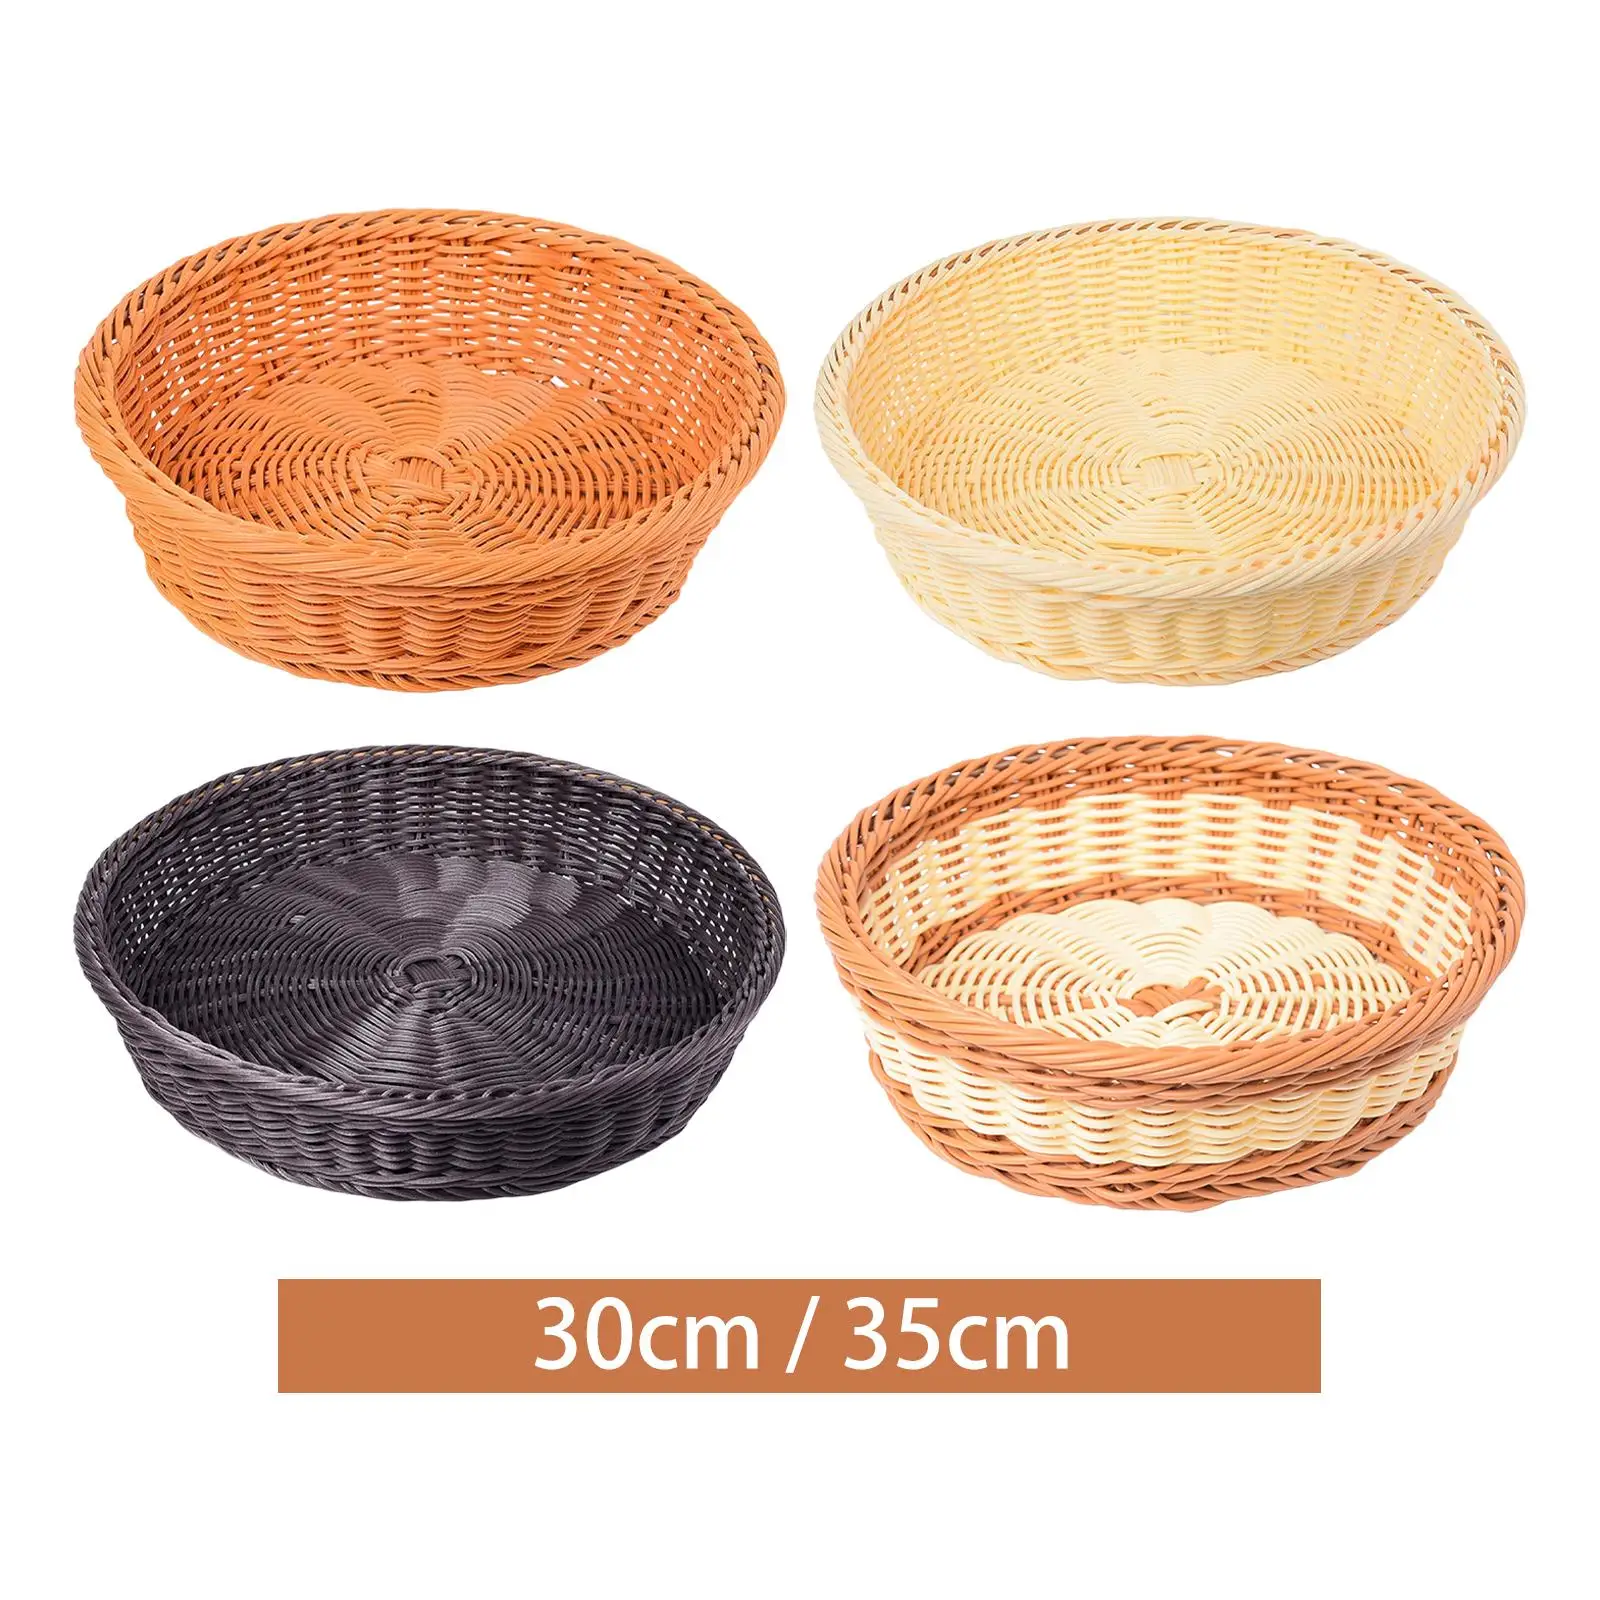 Wicker Woven Bread Basket Tabletop Food Serving Baskets Tray for Fruits Breakfast Home Vegetables Dining Coffee Table